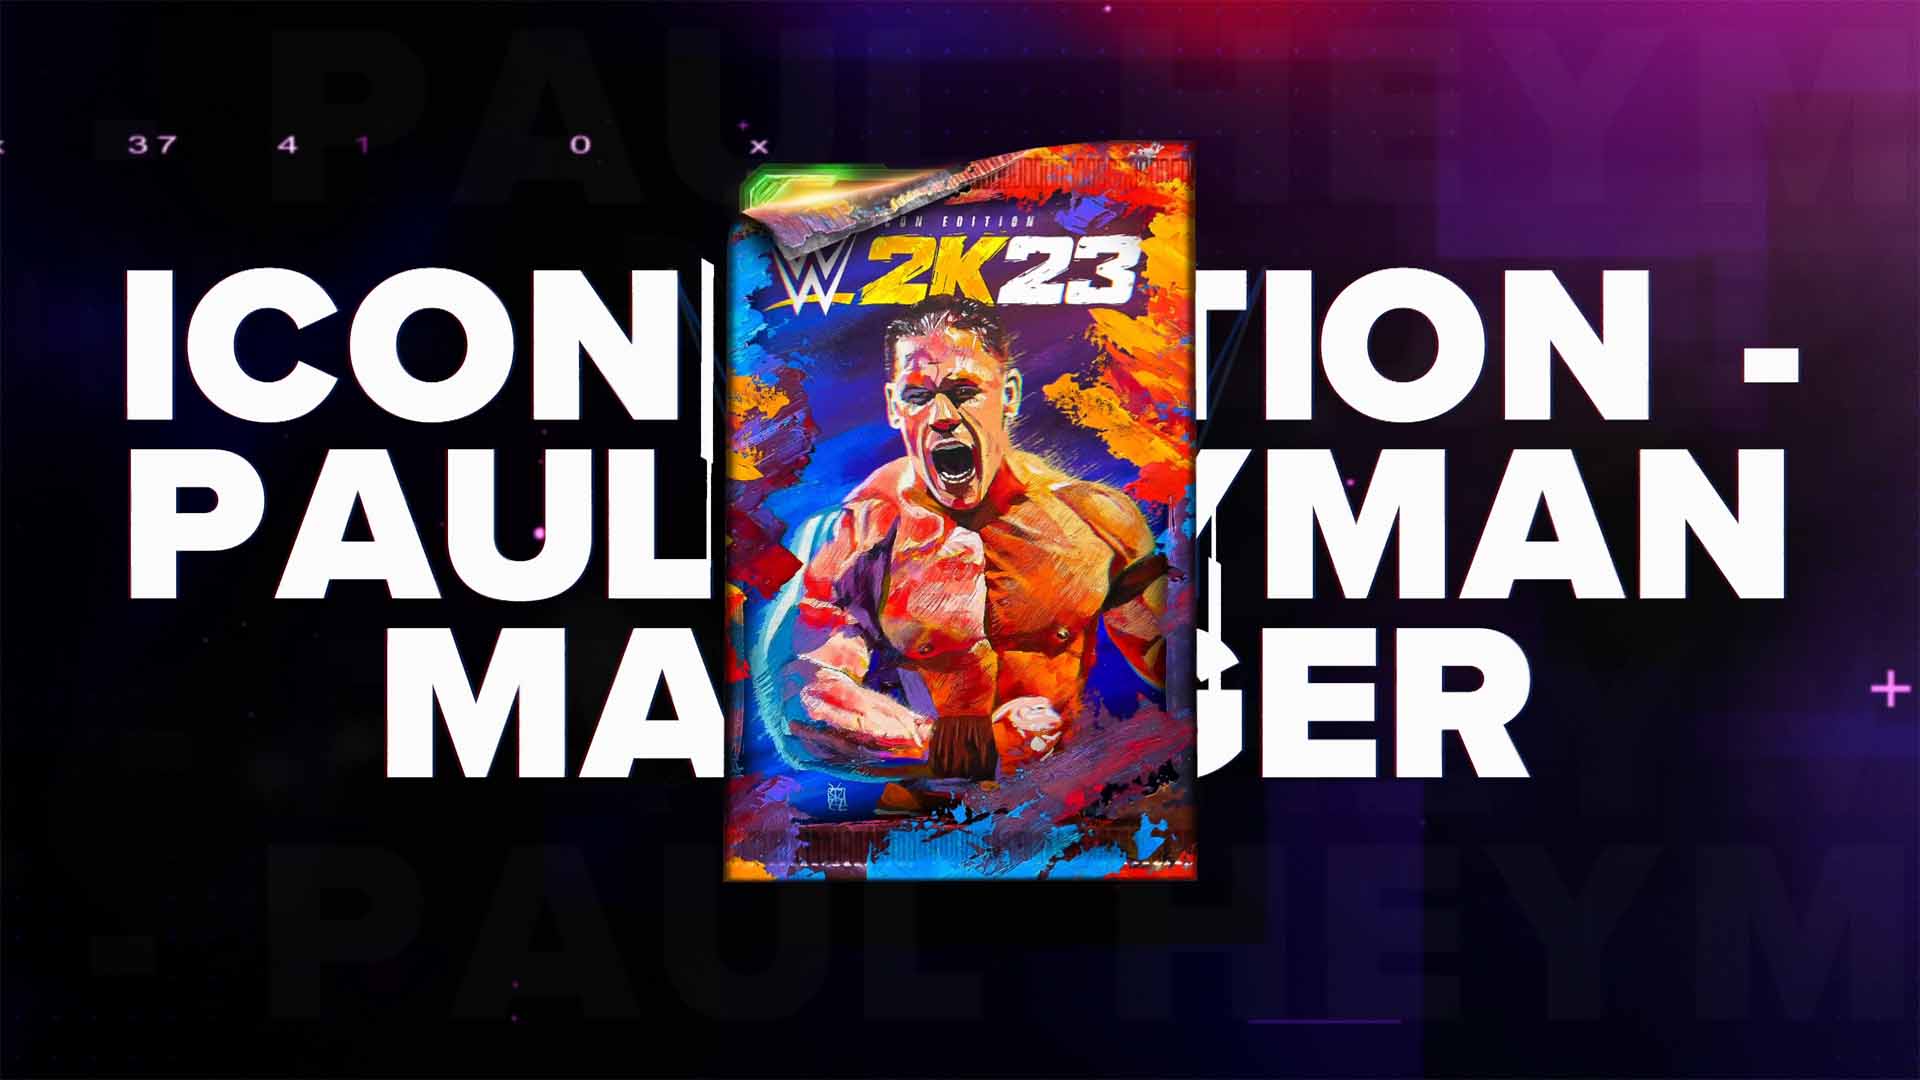 Is the WWE 2K23 Deluxe Edition and Icon Edition worth it?